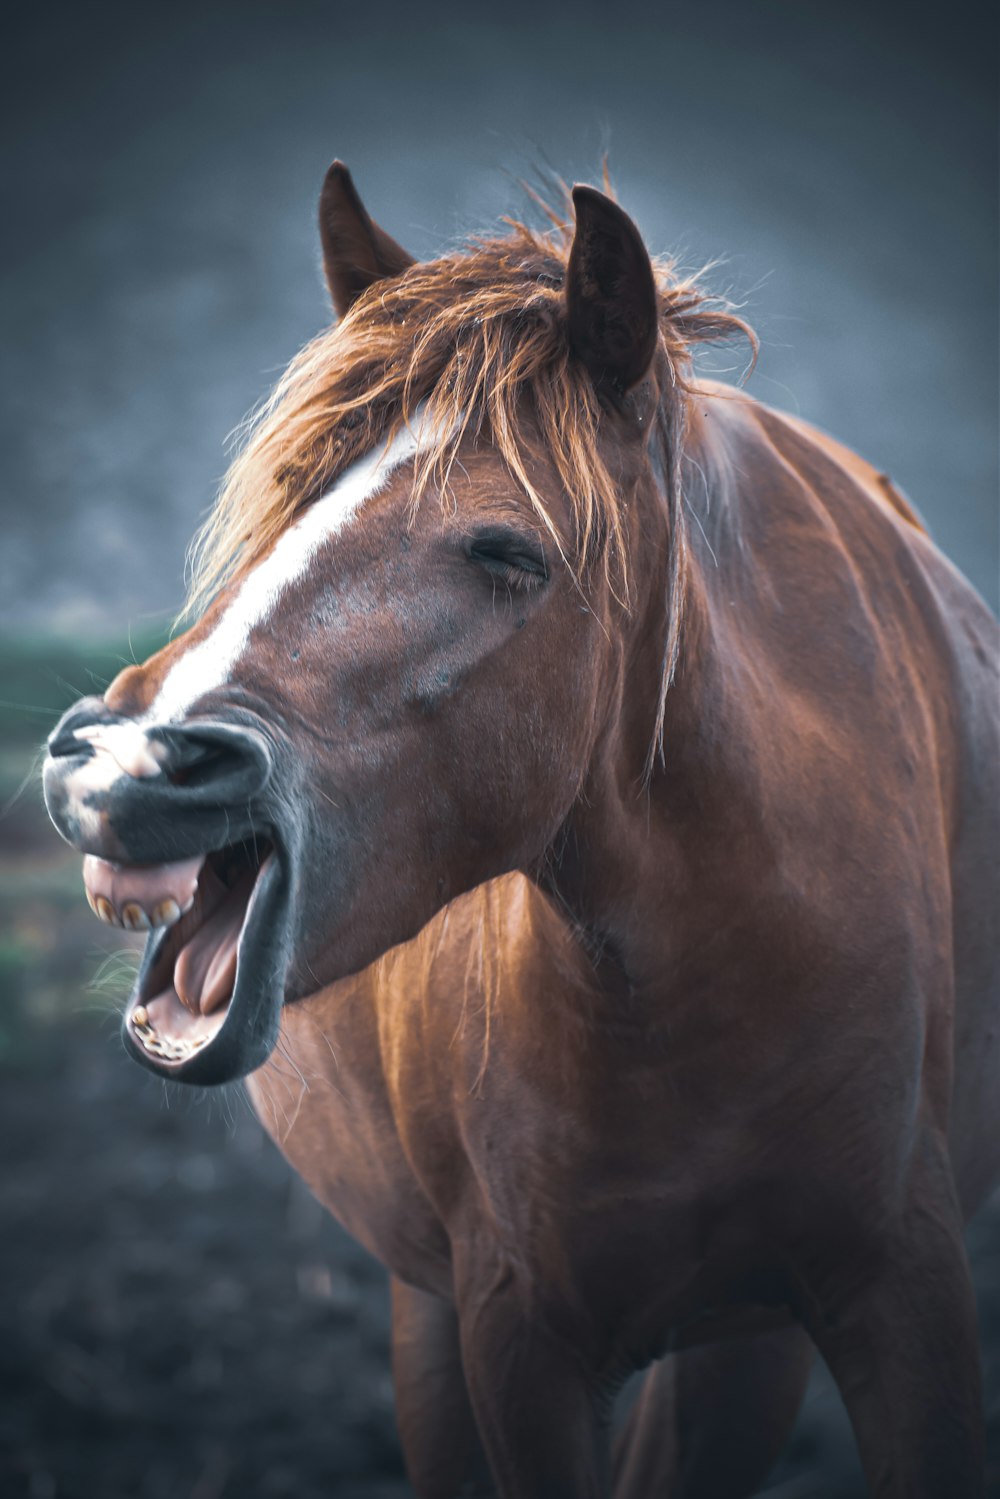 brown horse showing mouth during daytime